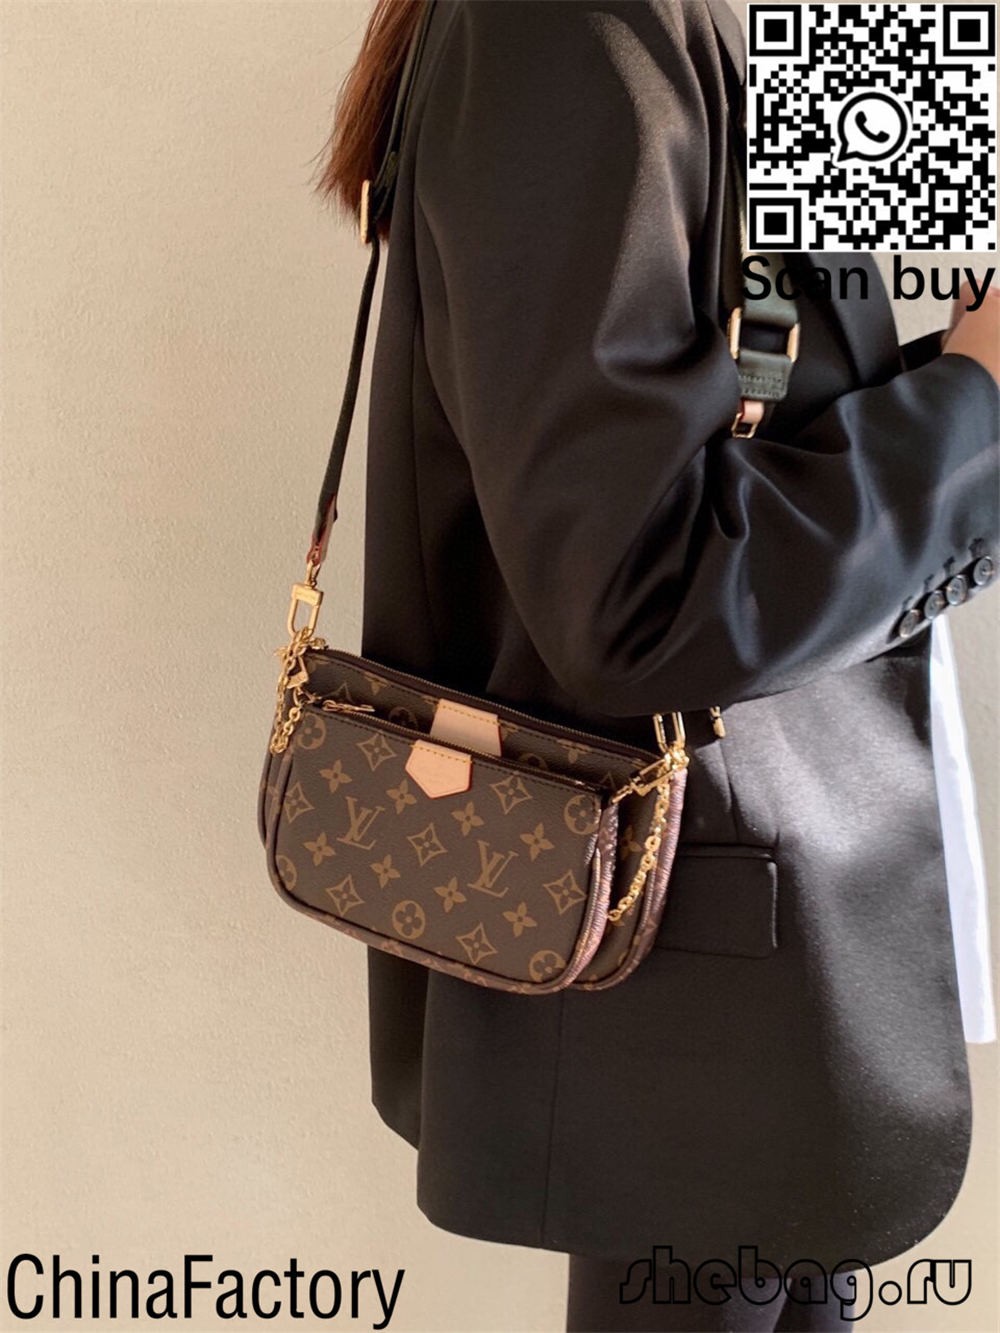 Selling replica designer bags for 12 years, the bags you buy online are shipped from Guangzhou, China (2022 updated)-Best Quality Fake designer Bag Review, Replica designer bag ru